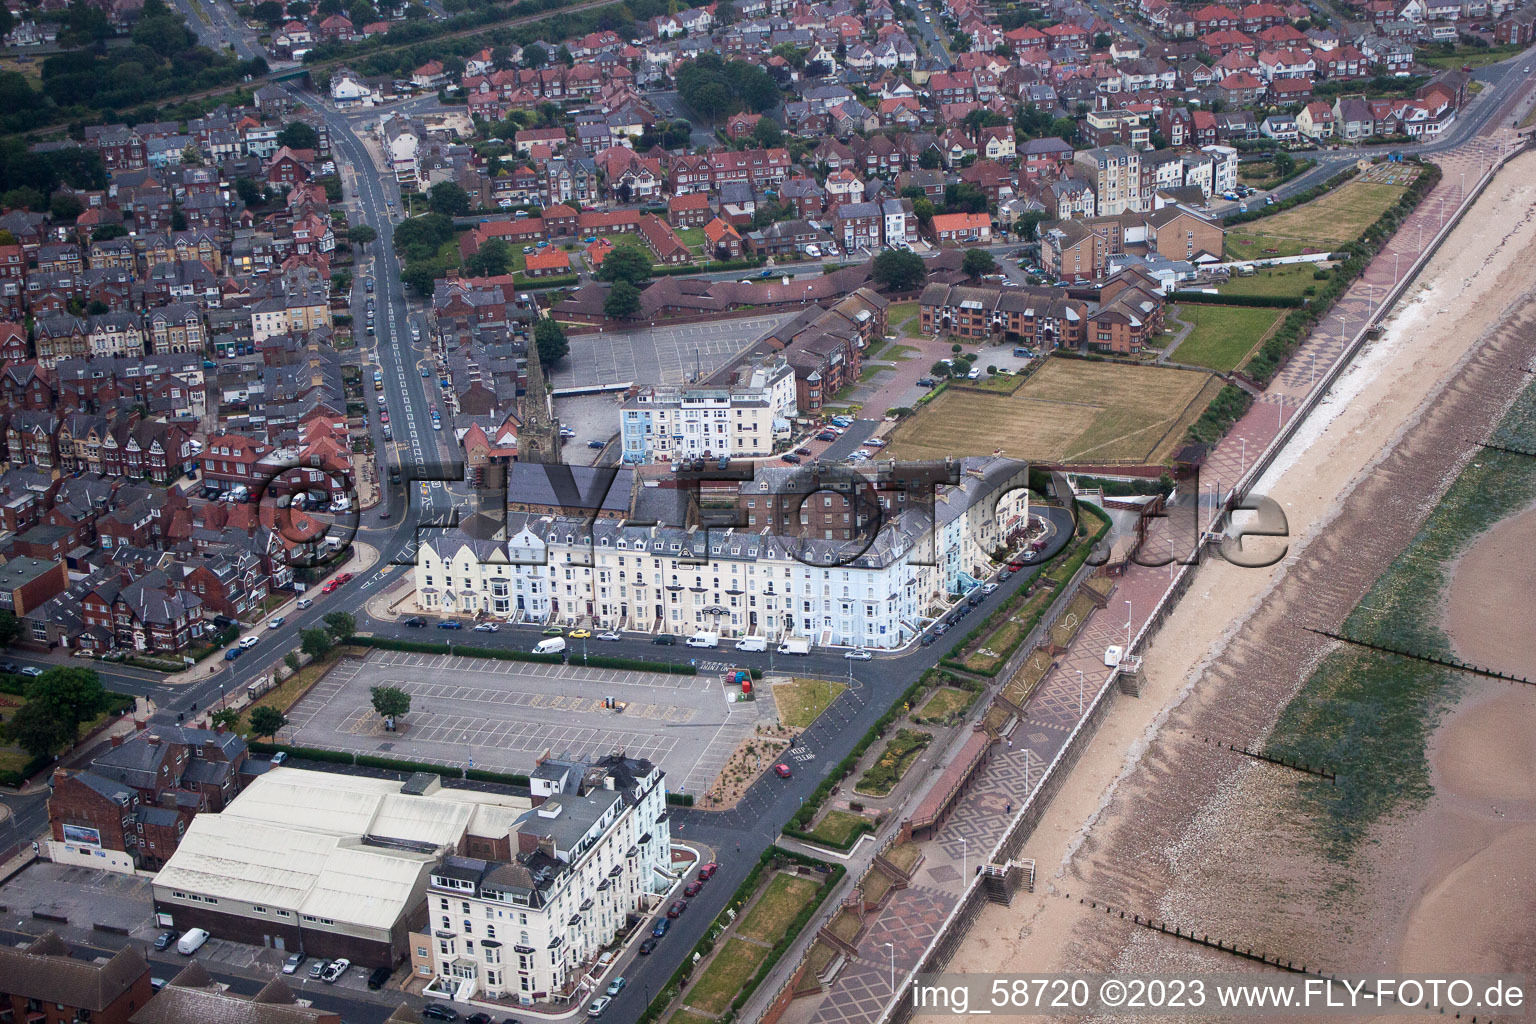 Bridlington in the state England, Great Britain out of the air